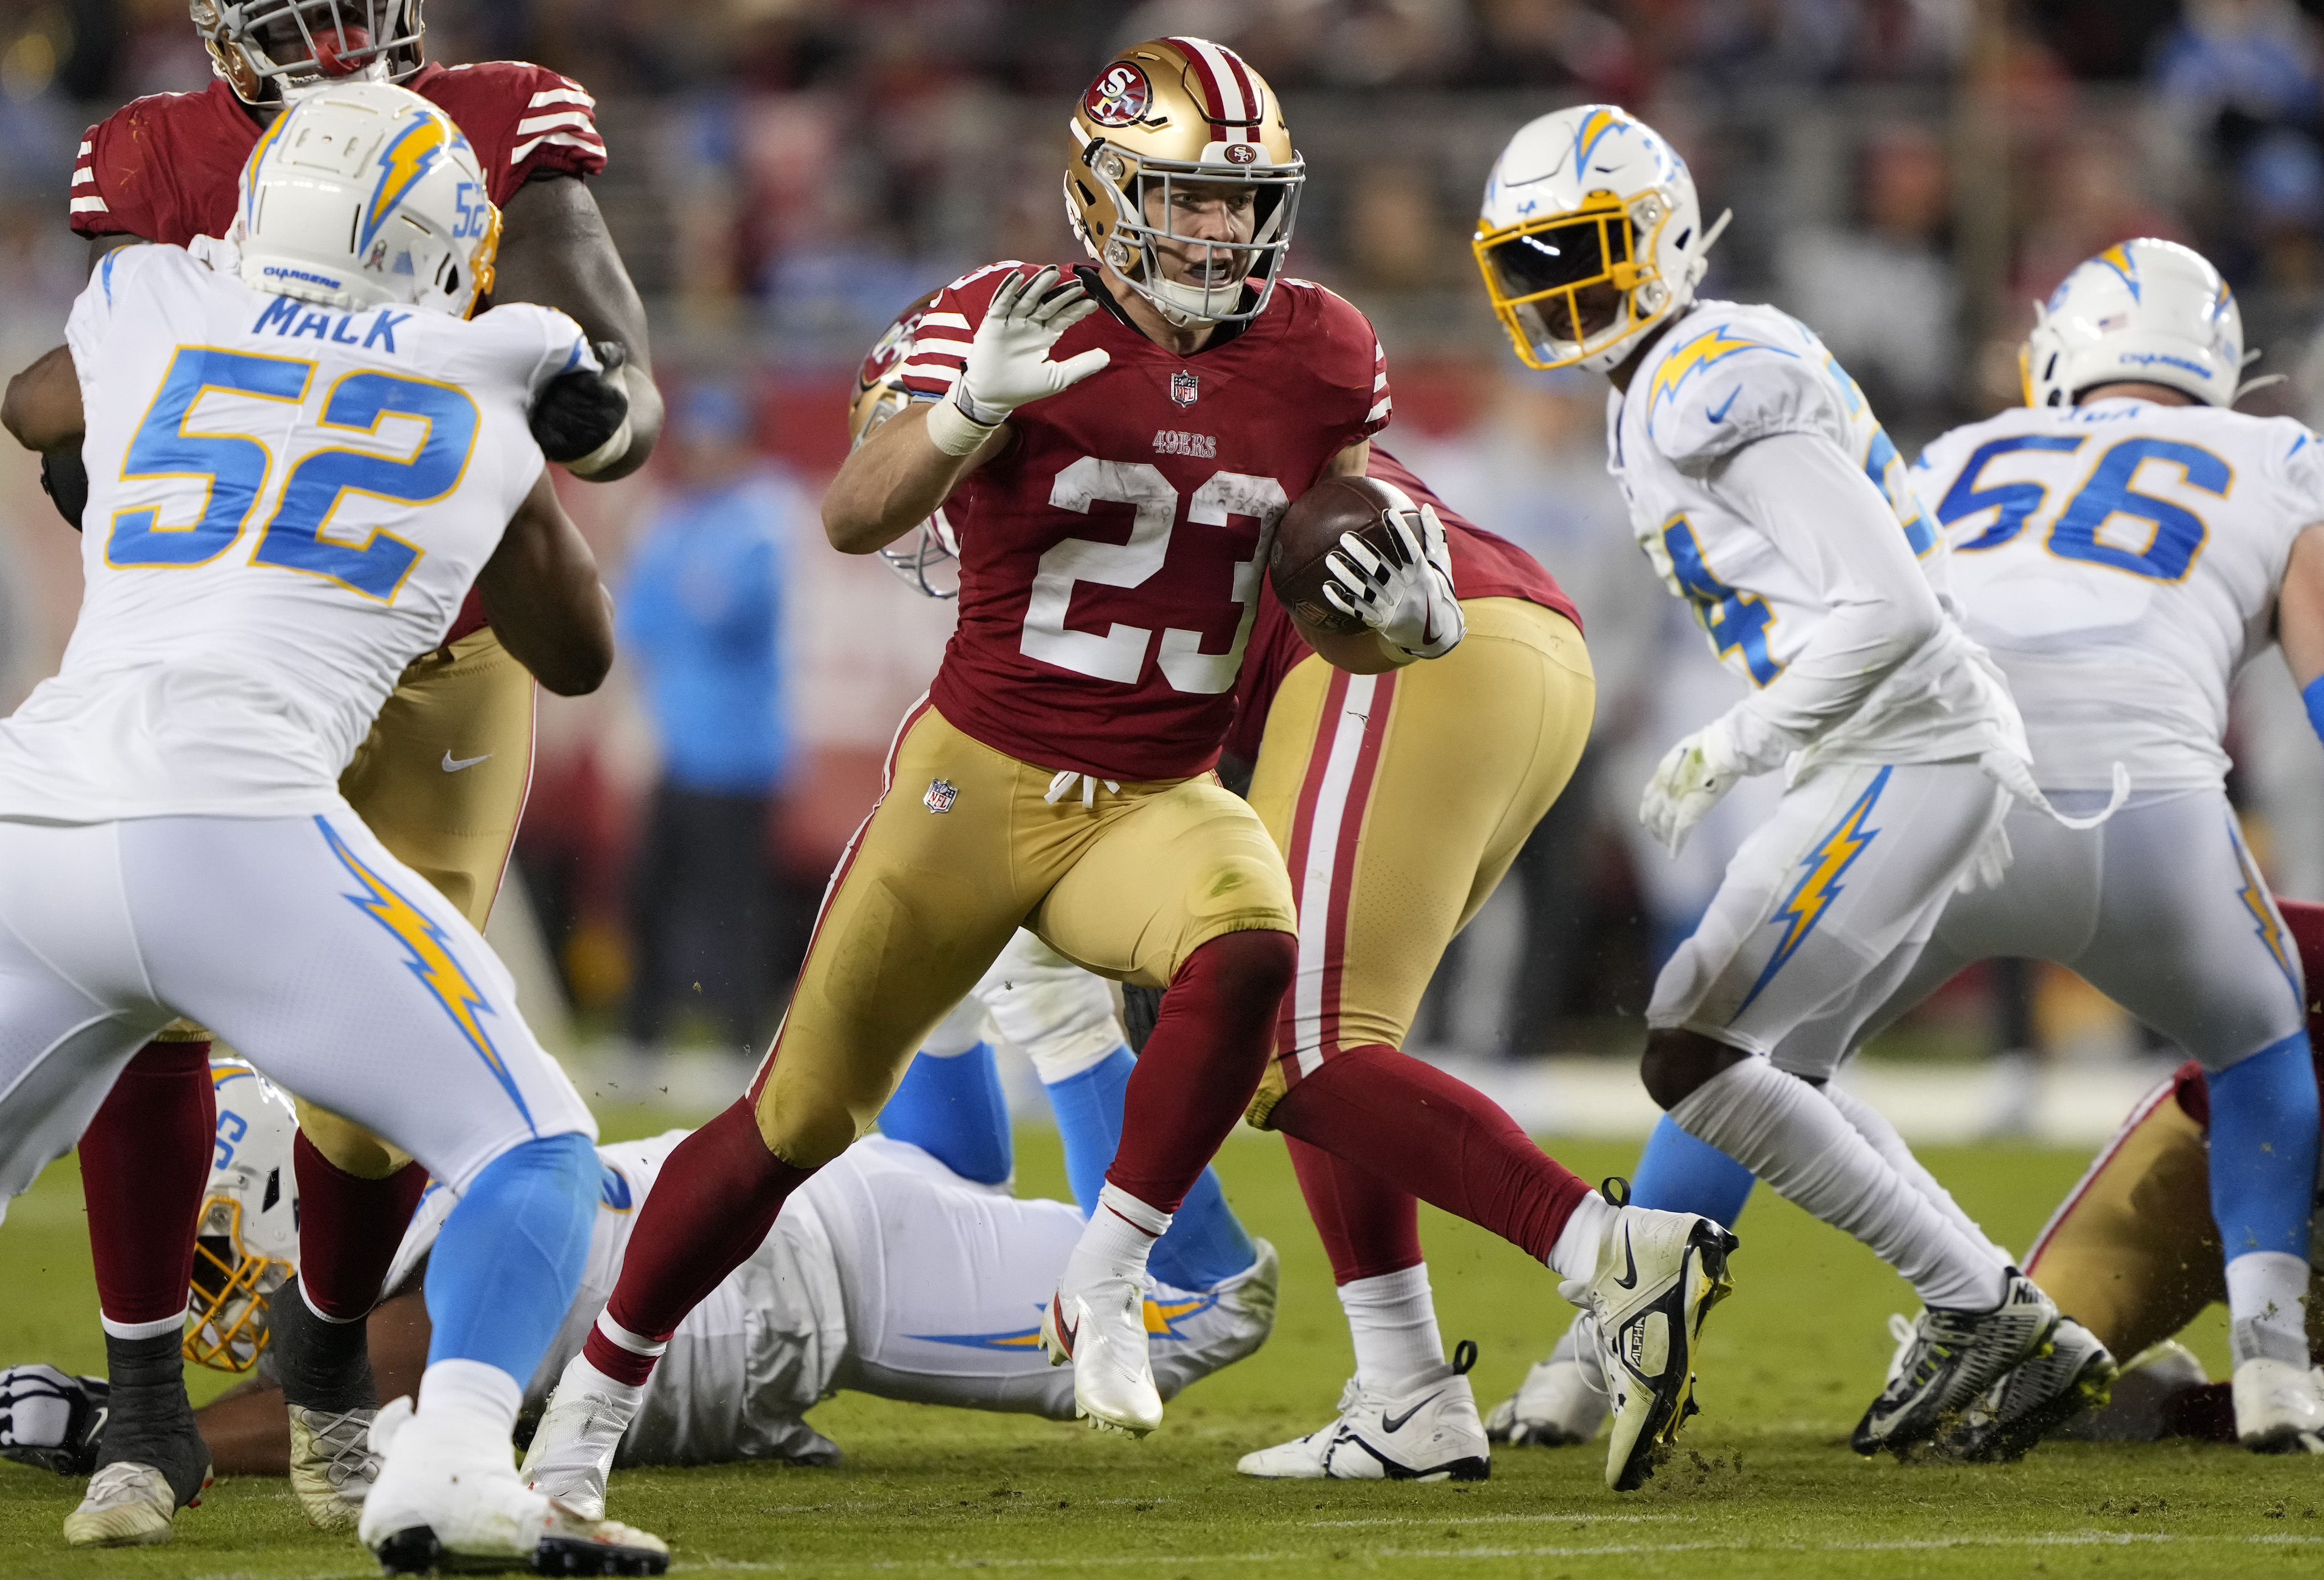 49ers-Chargers: 49ers take late lead on CMC TD, win 22-16